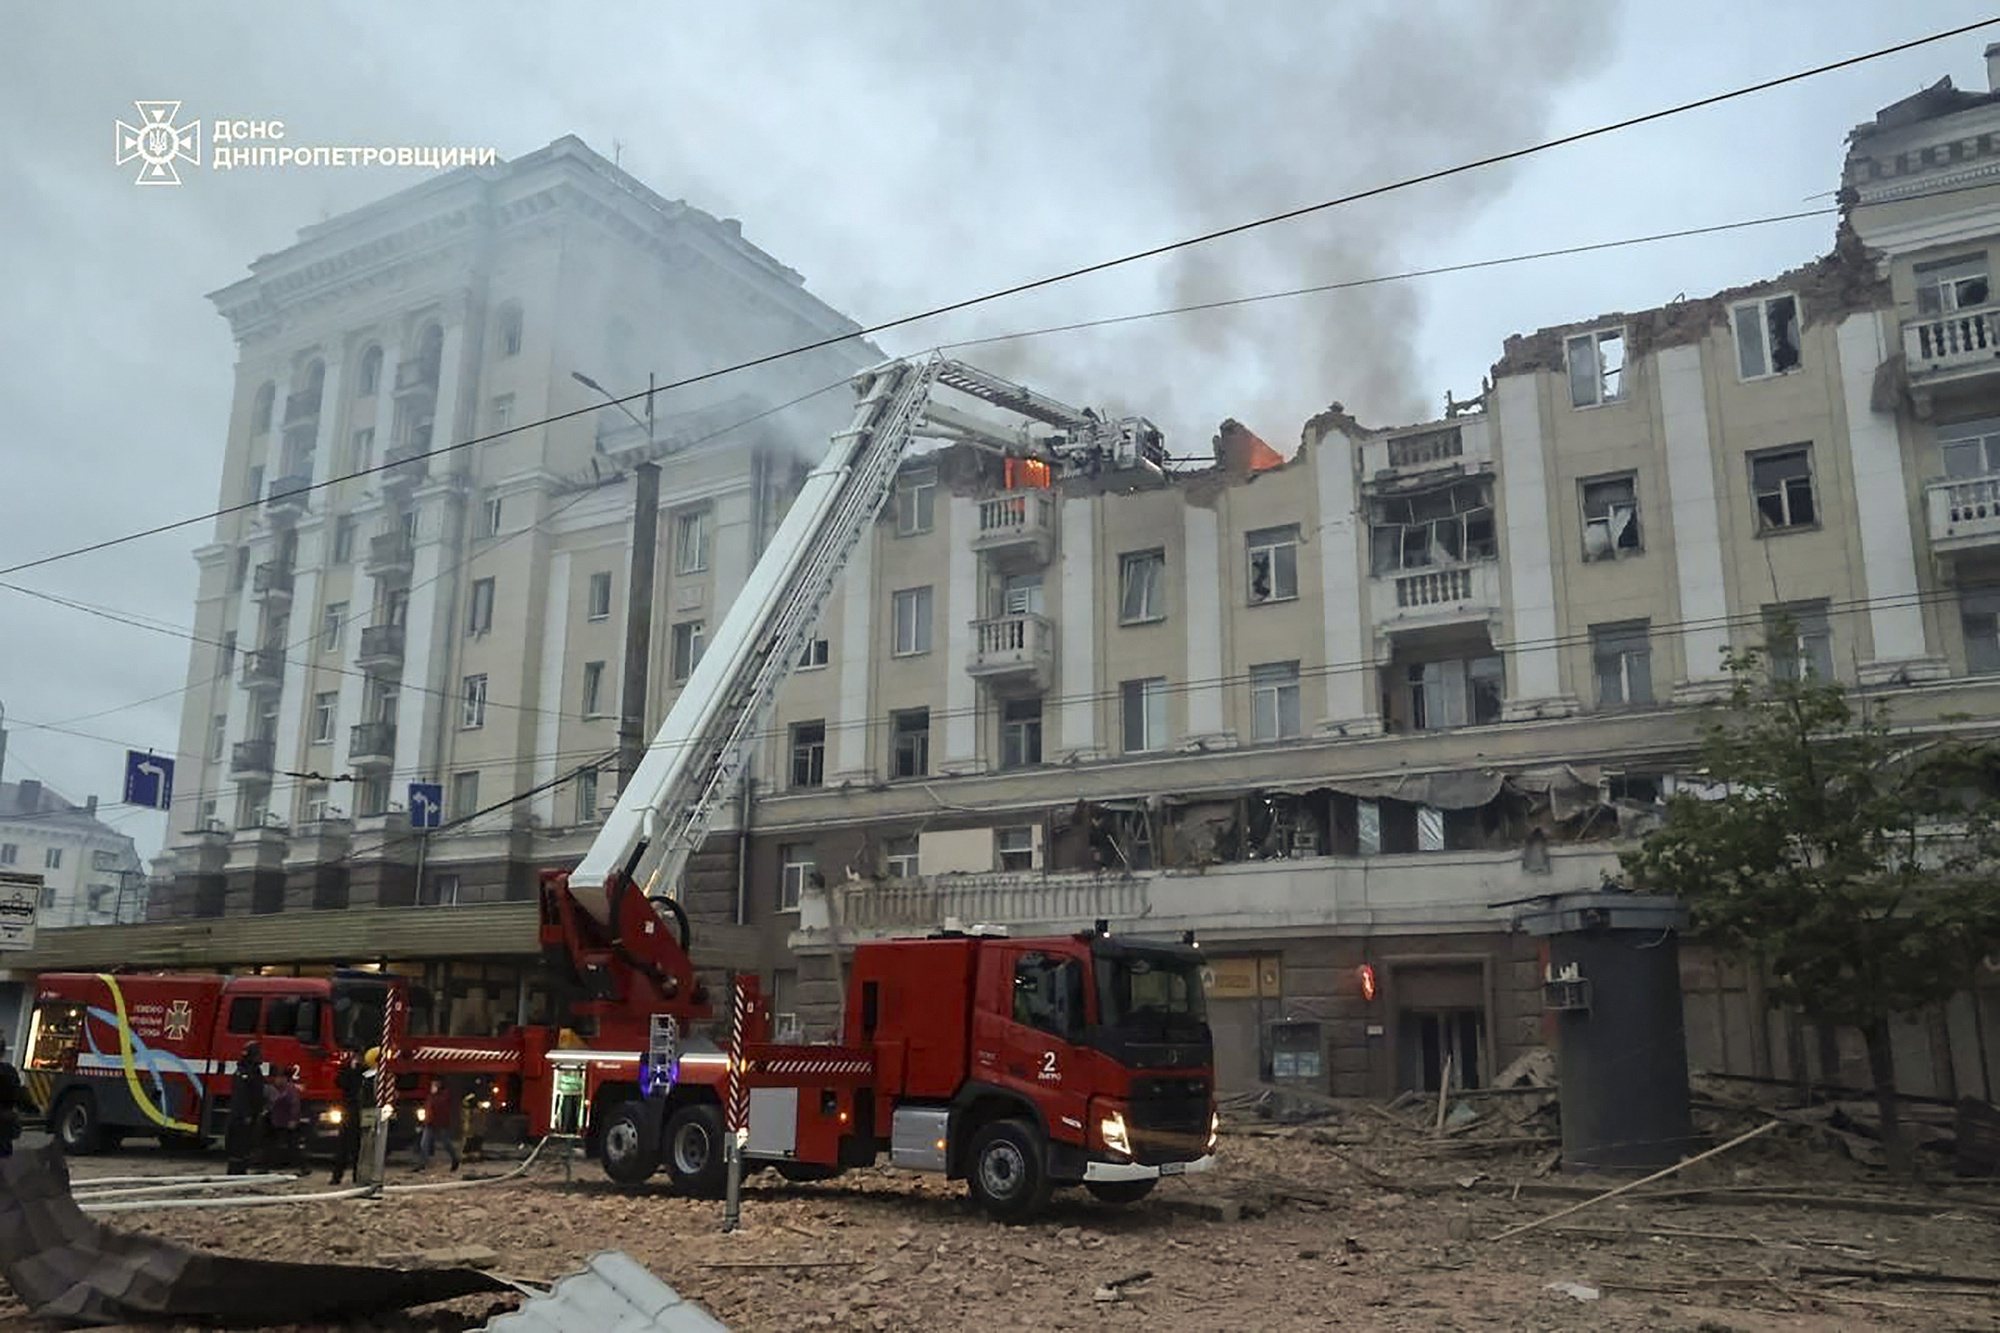 epa11287726 A handout photo made available by the State Emergency Service shows Ukrainian rescuers working at the site of a rocket attack on a residential building in the city of Dnipro, Dnipropetrovsk region, southeastern Ukraine, 19 April 2024, amid the Russian invasion. According to the State Emergency Service, at least two people died and 16 others were injured in a Russian rocket attack on Dnipro in the early morning of 19 April.  EPA/STATE EMERGENCY SERVICE HANDOUT   HANDOUT EDITORIAL USE ONLY/NO SALES HANDOUT EDITORIAL USE ONLY/NO SALES